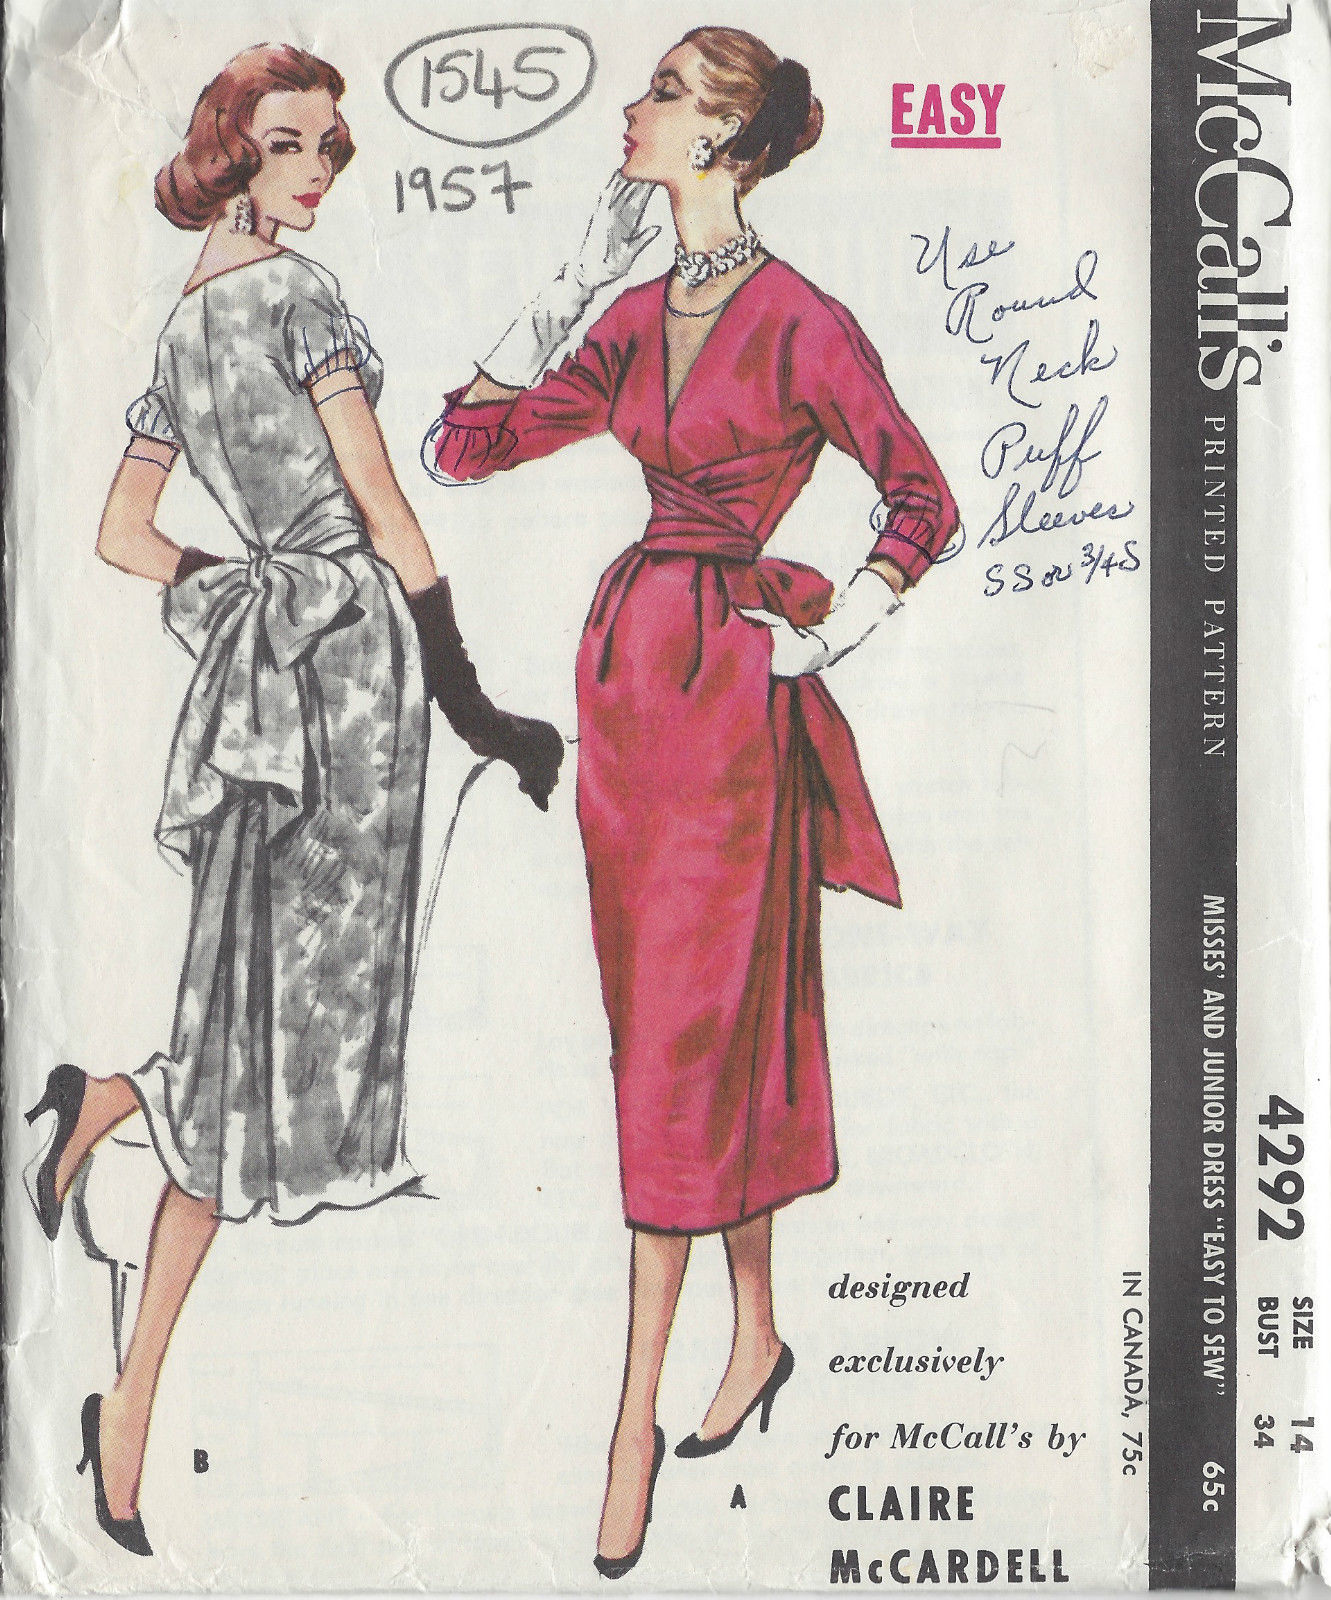 1957 Vintage Sewing Pattern B34 DRESS (1545) By Claire McCardell